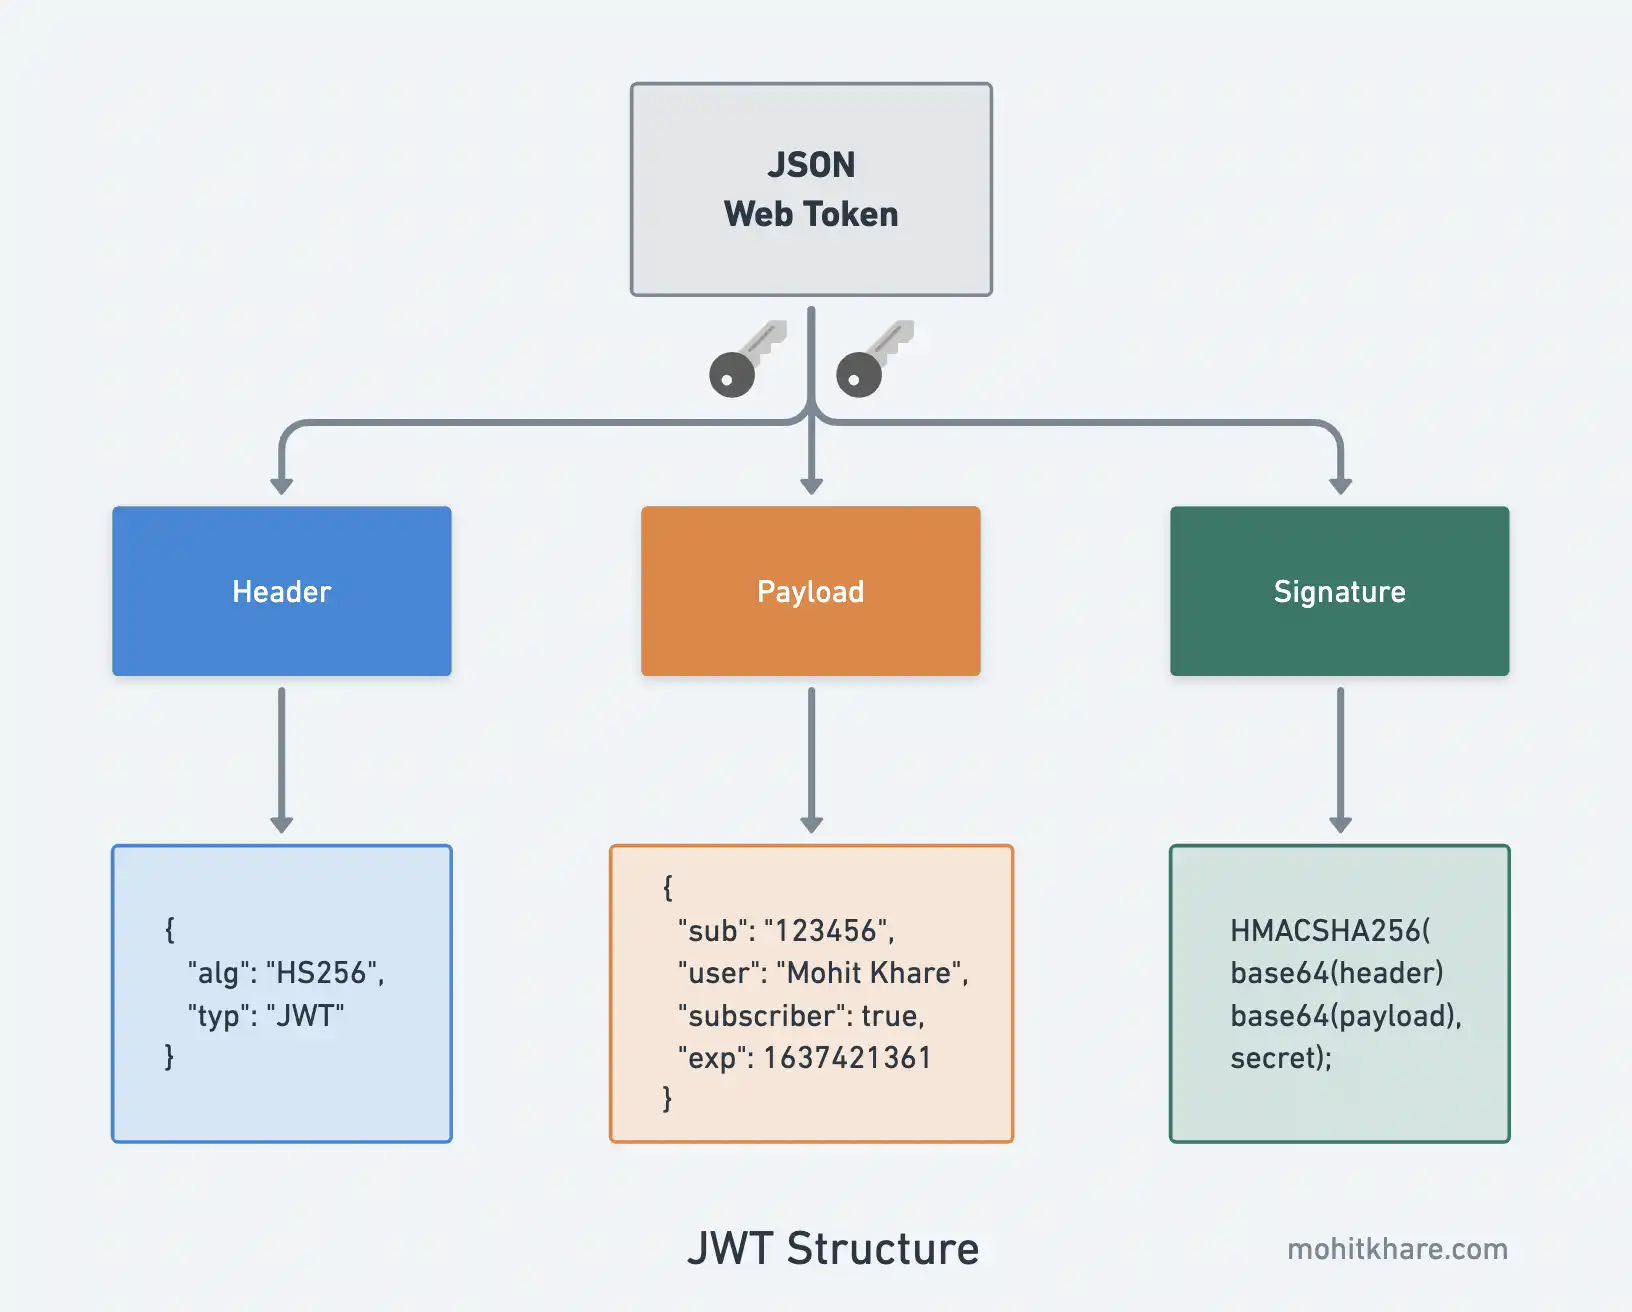 JWT Access Tokens | Userfront documentation